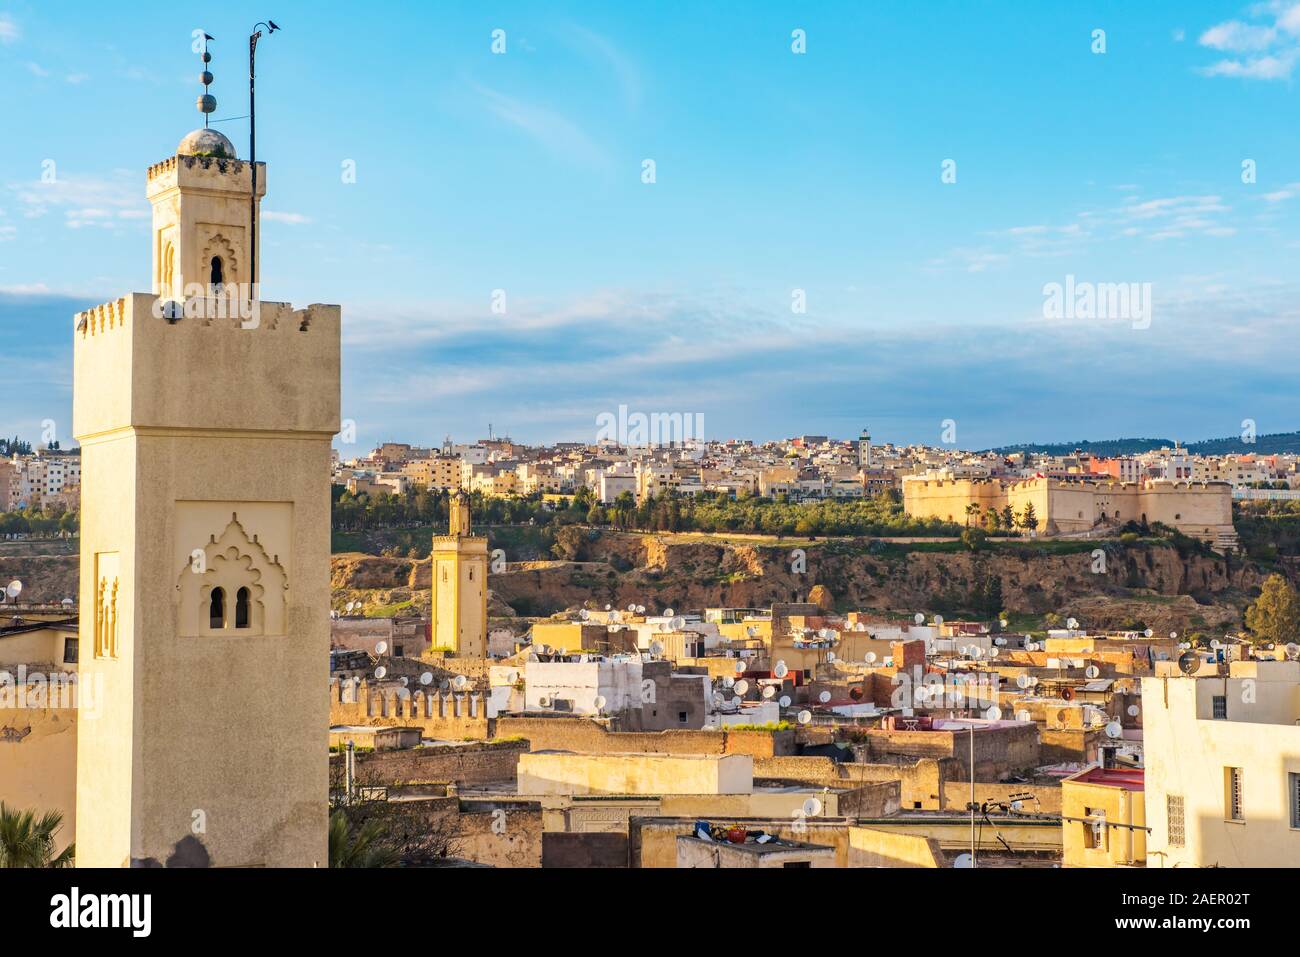 Fes, Morocco Africa. Old town panorama with Qaraouiyine Mosque and medina Stock Photo